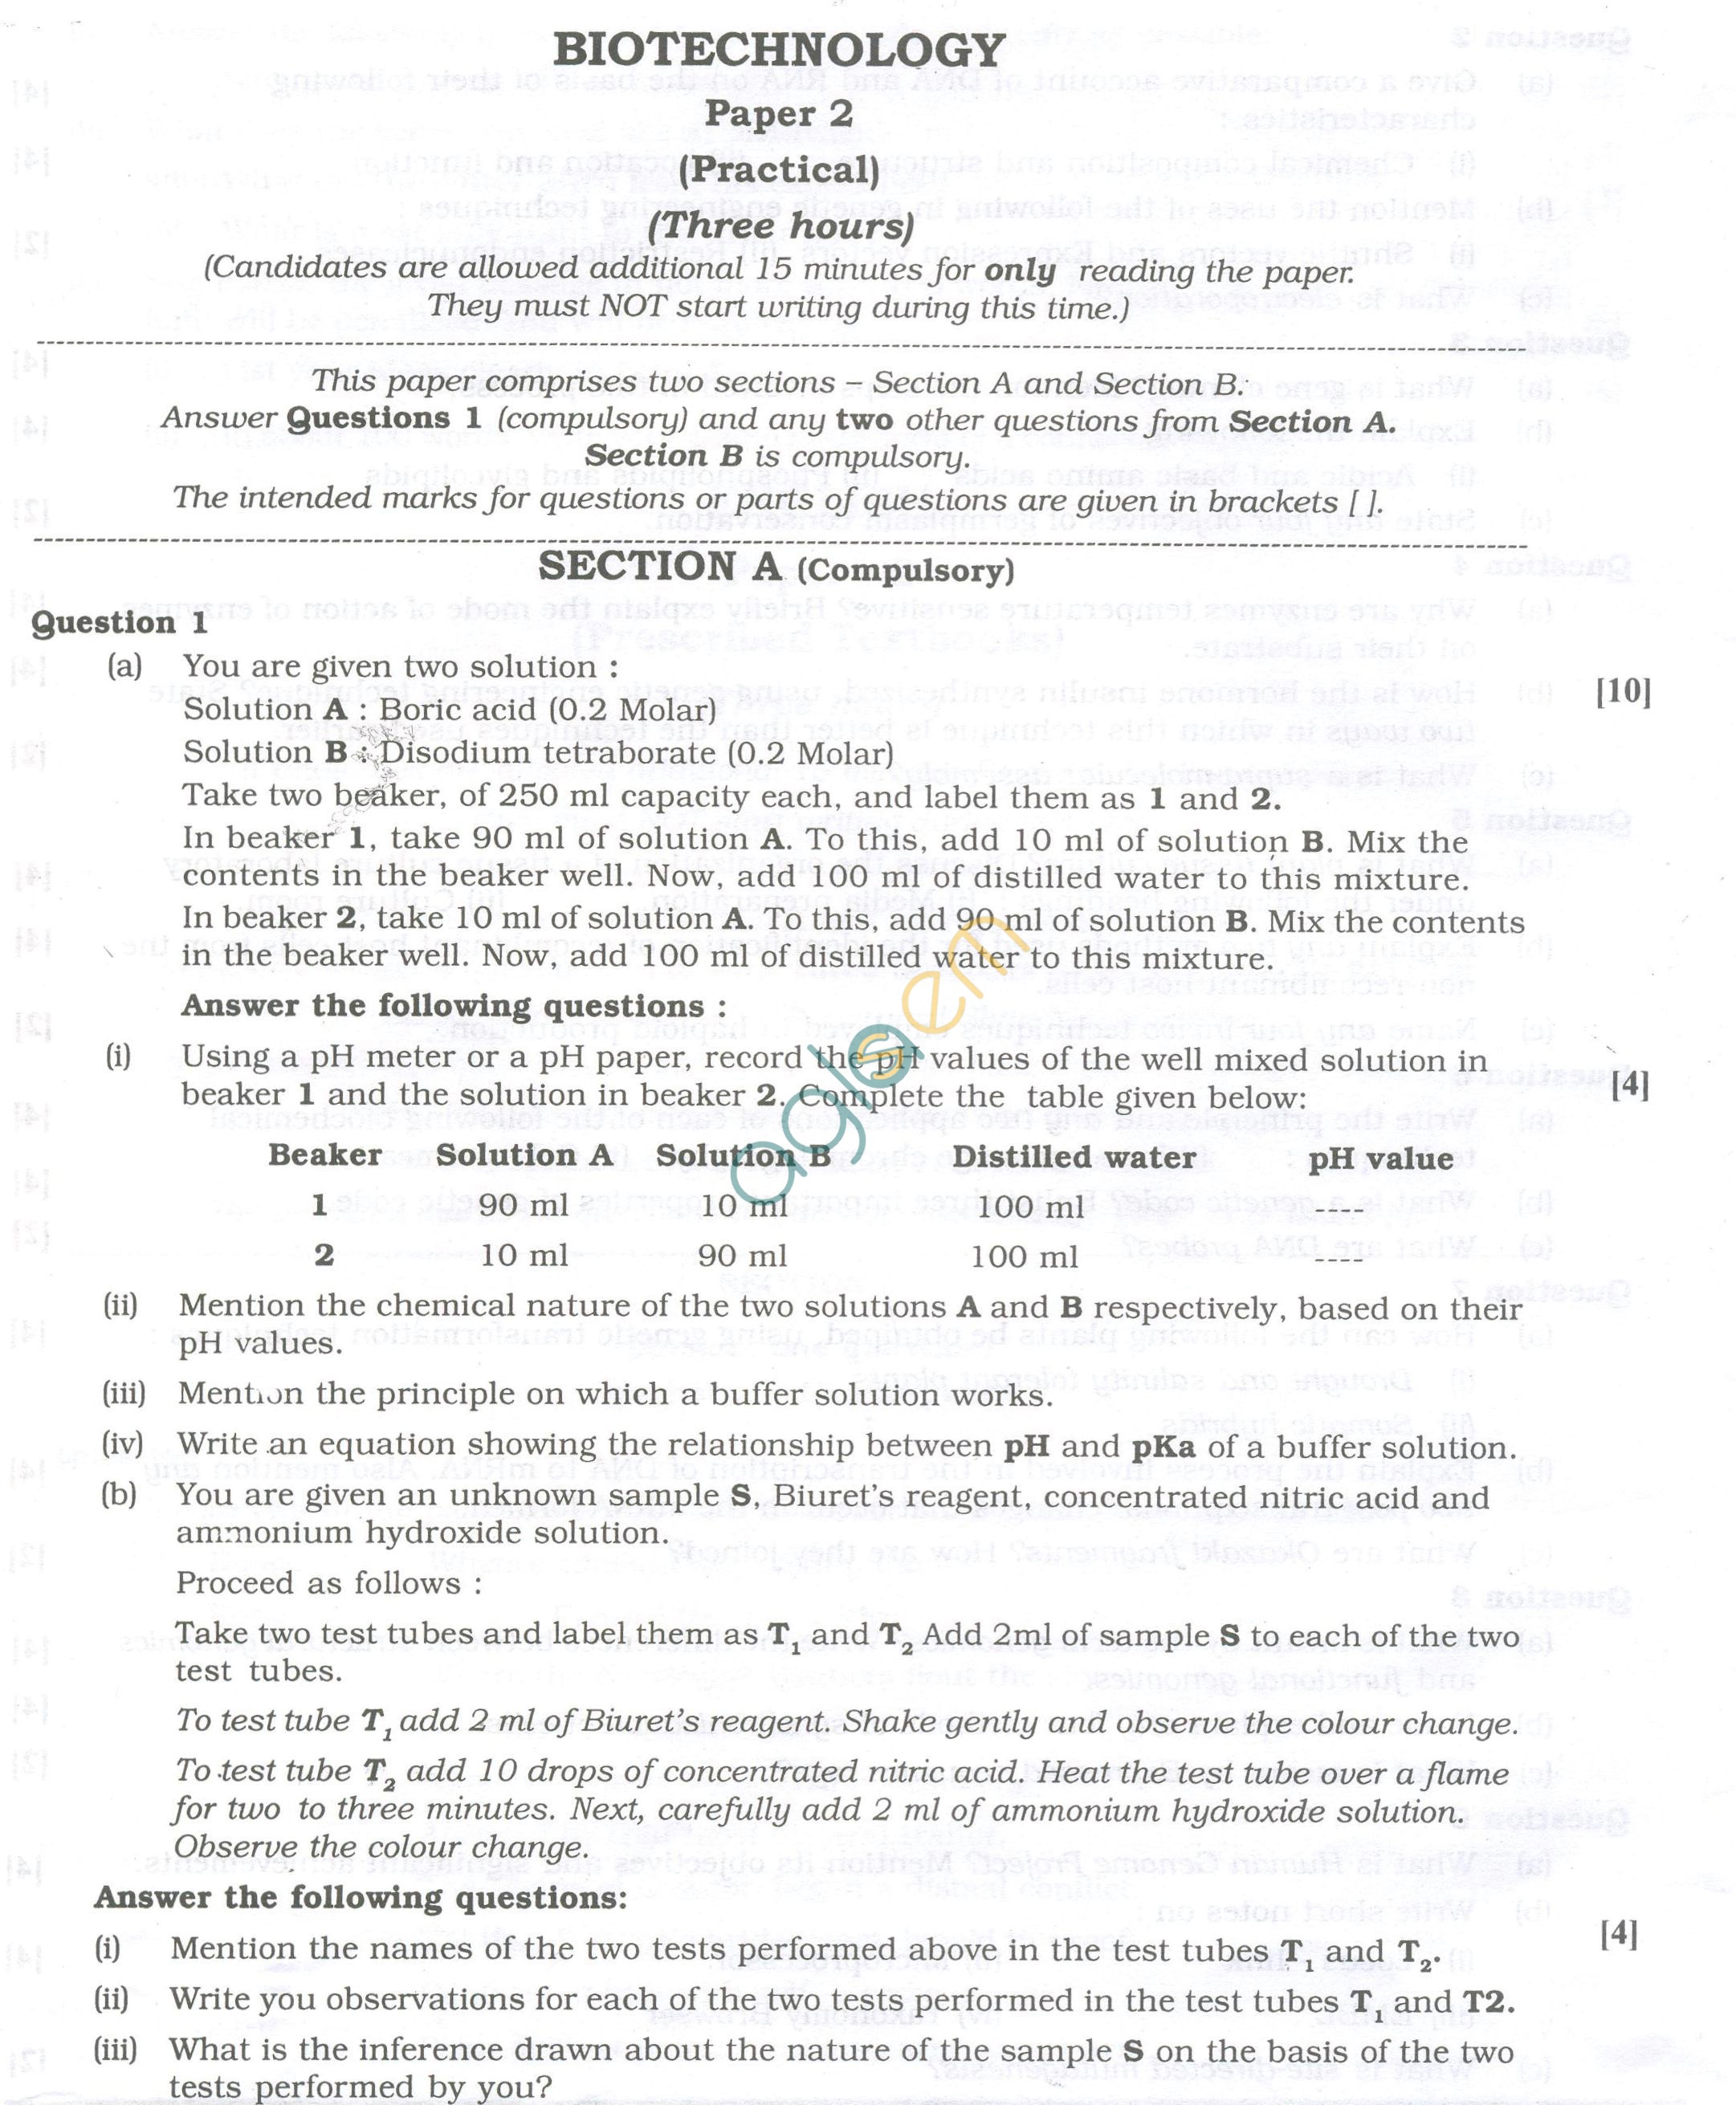 ISC Question Papers 2013 for Class 12 - Biotechnology Paper 2